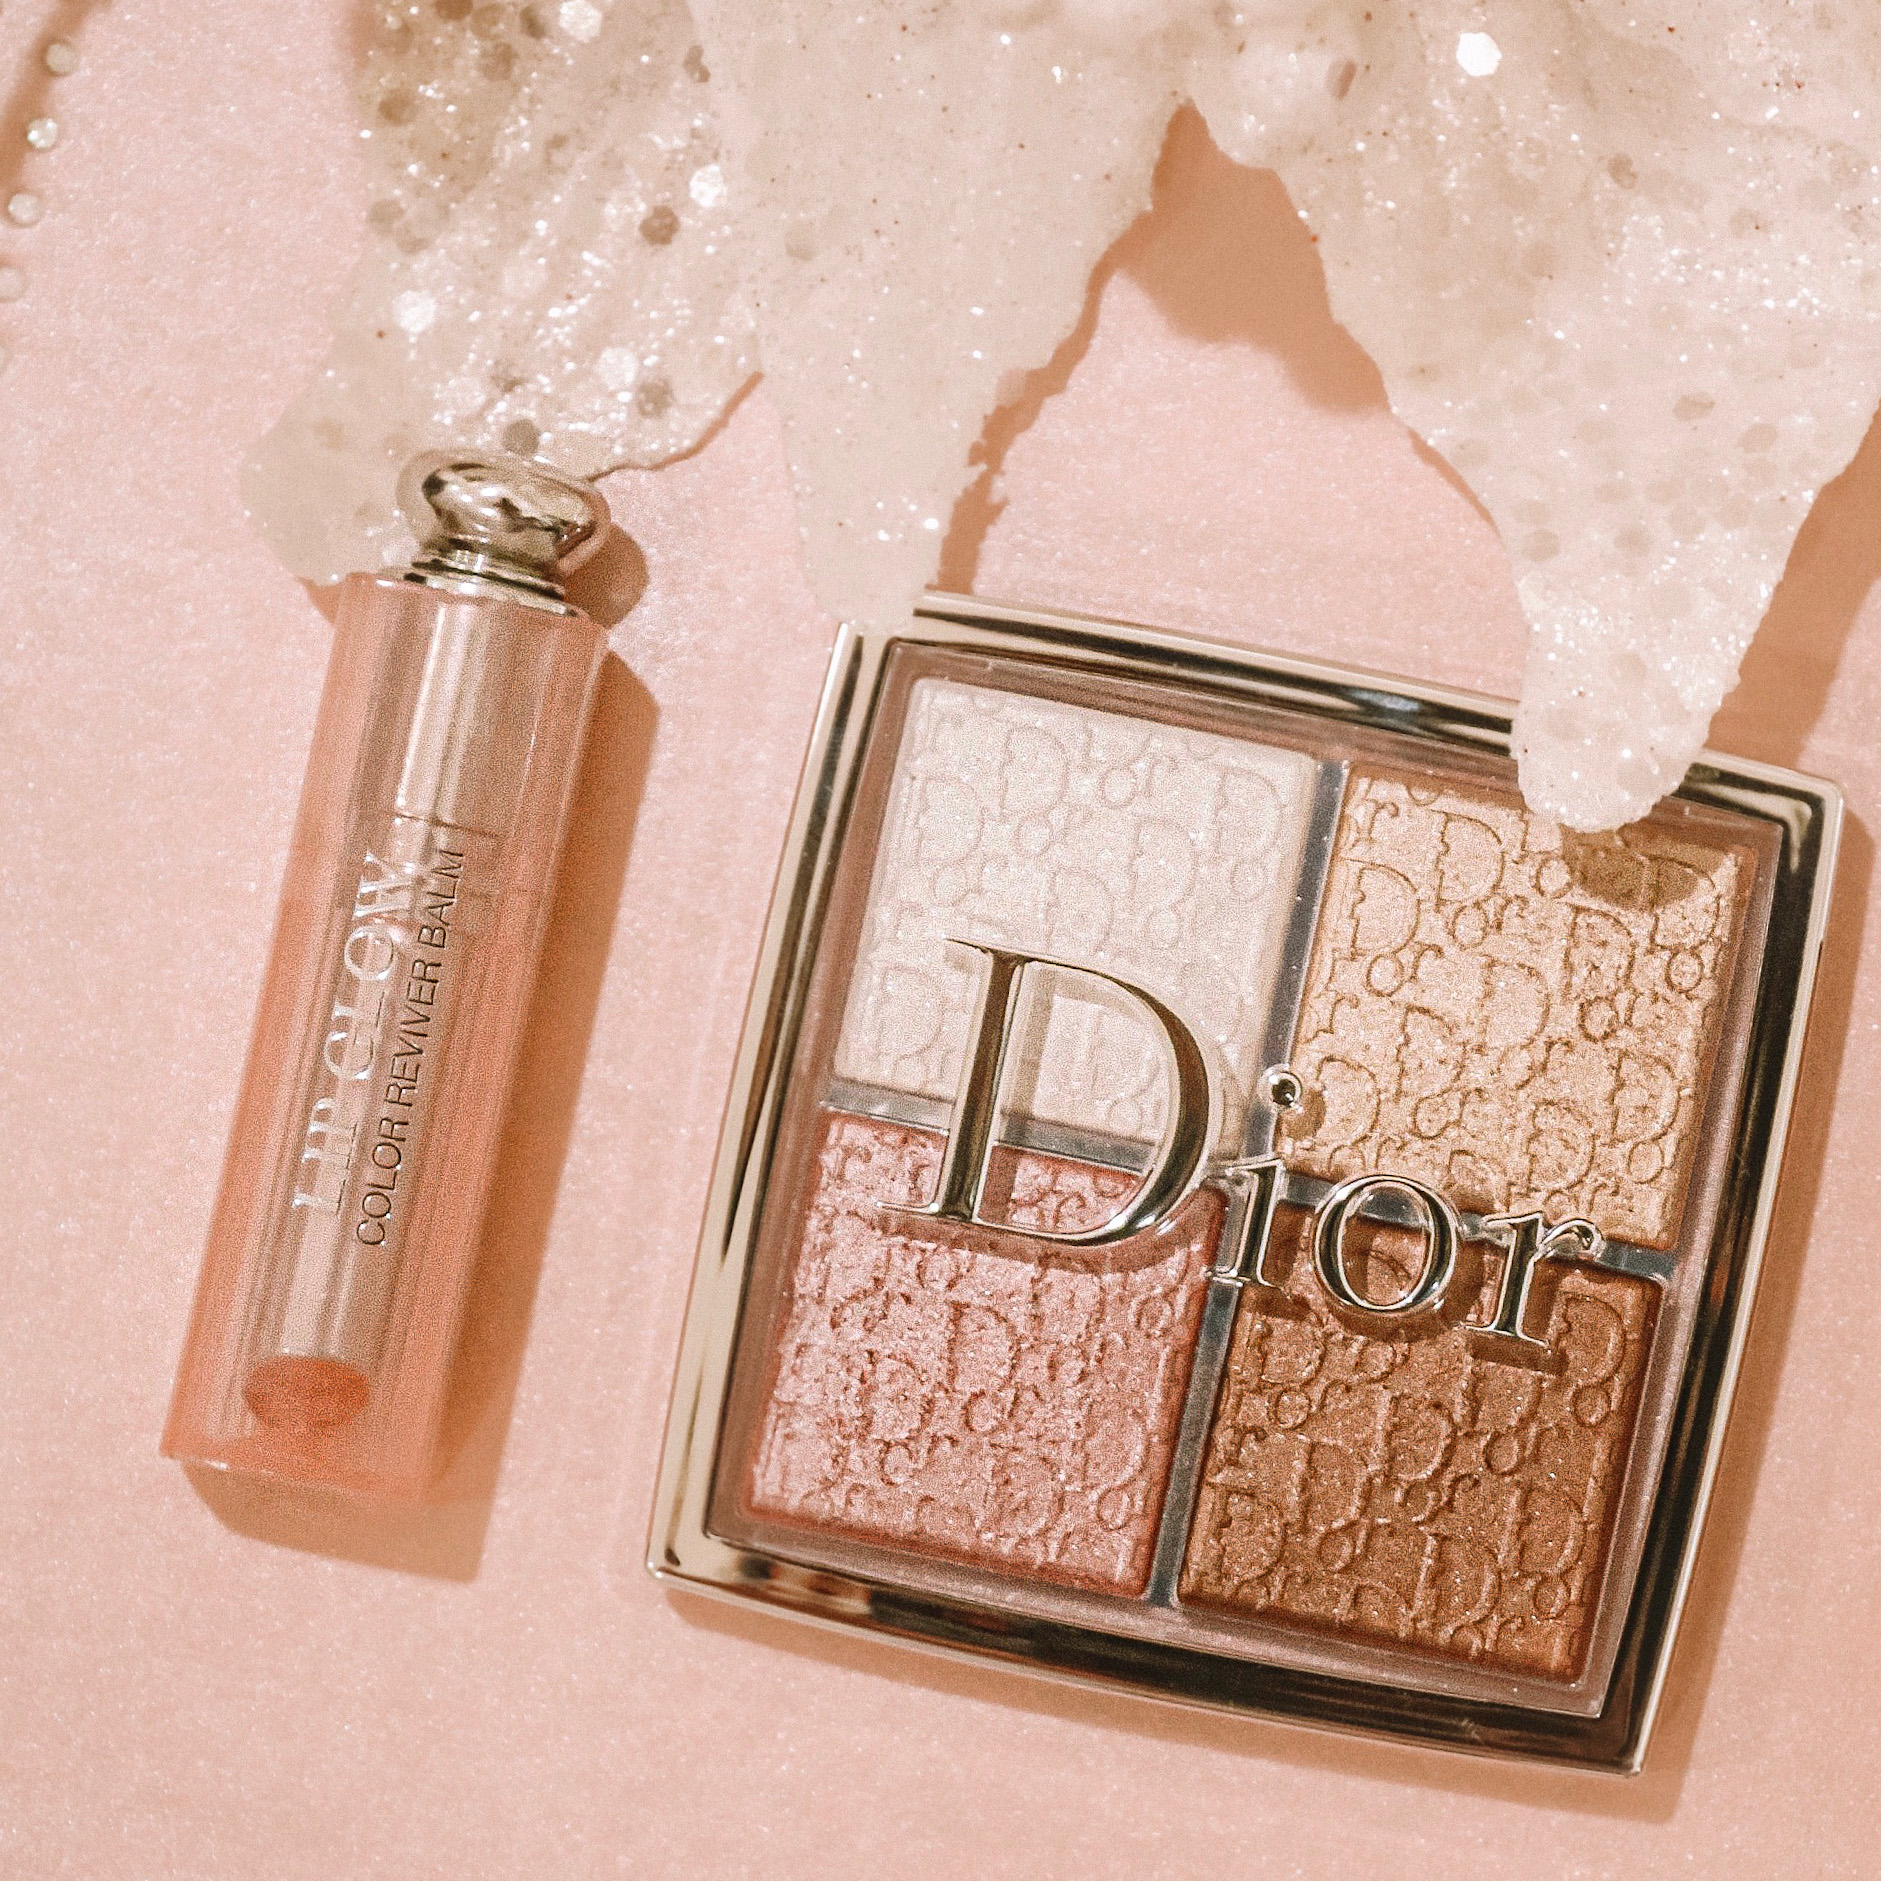 The Best Dior Makeup Products In 2020 • City & Chic